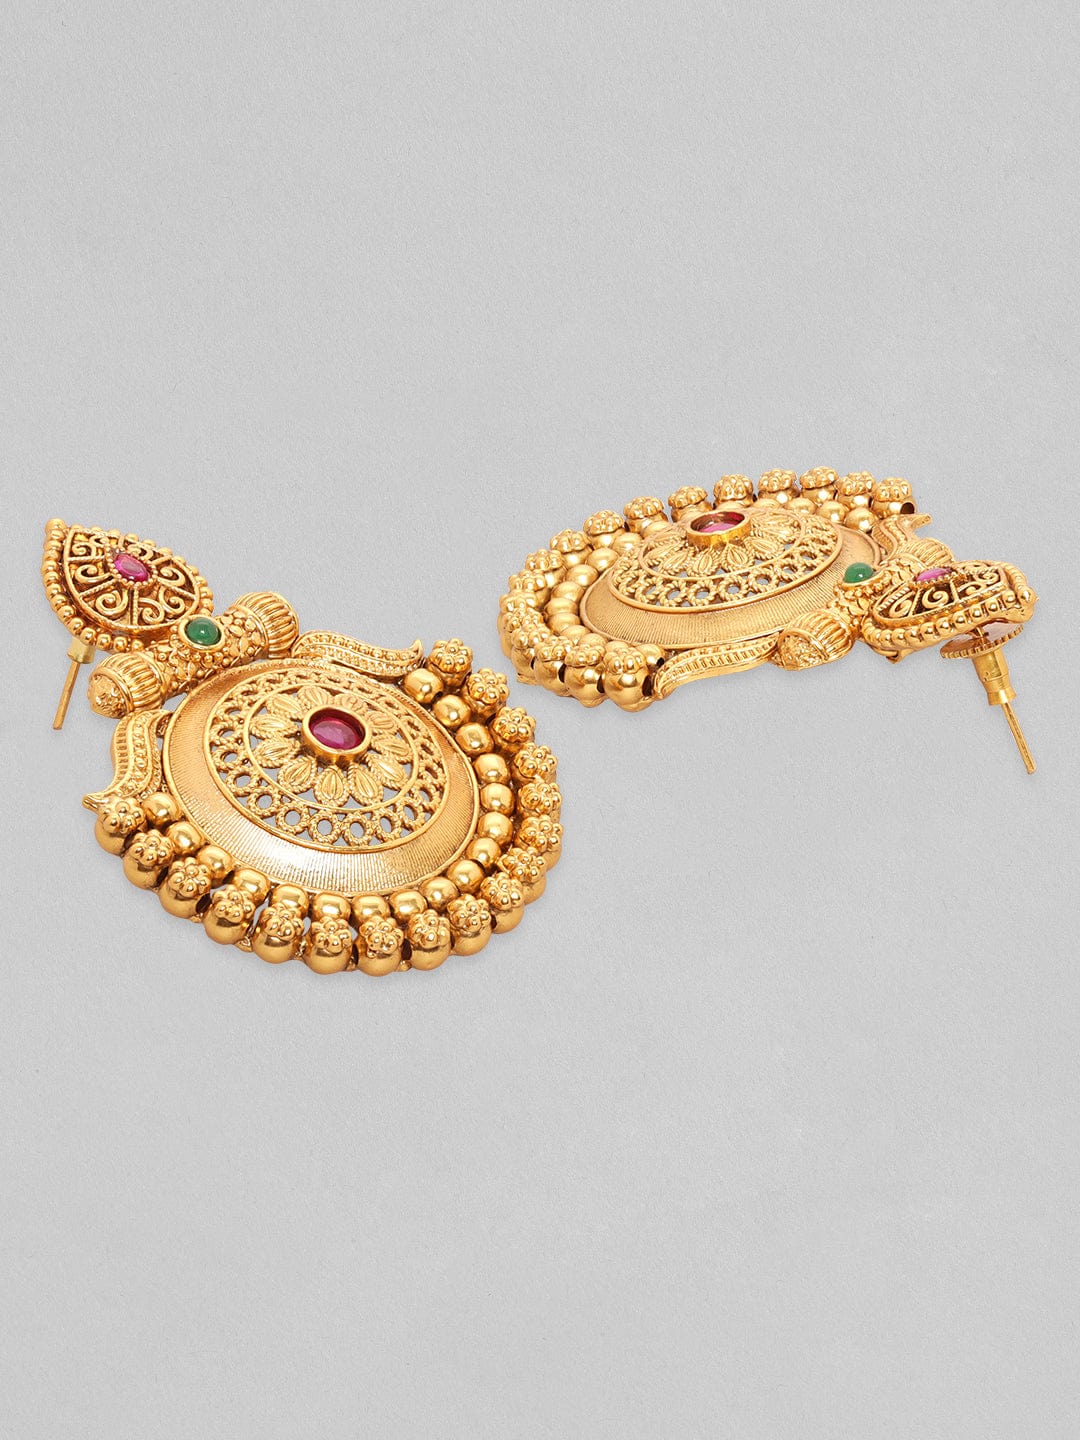 9 Latest Temple Design Earrings | Styles At Life